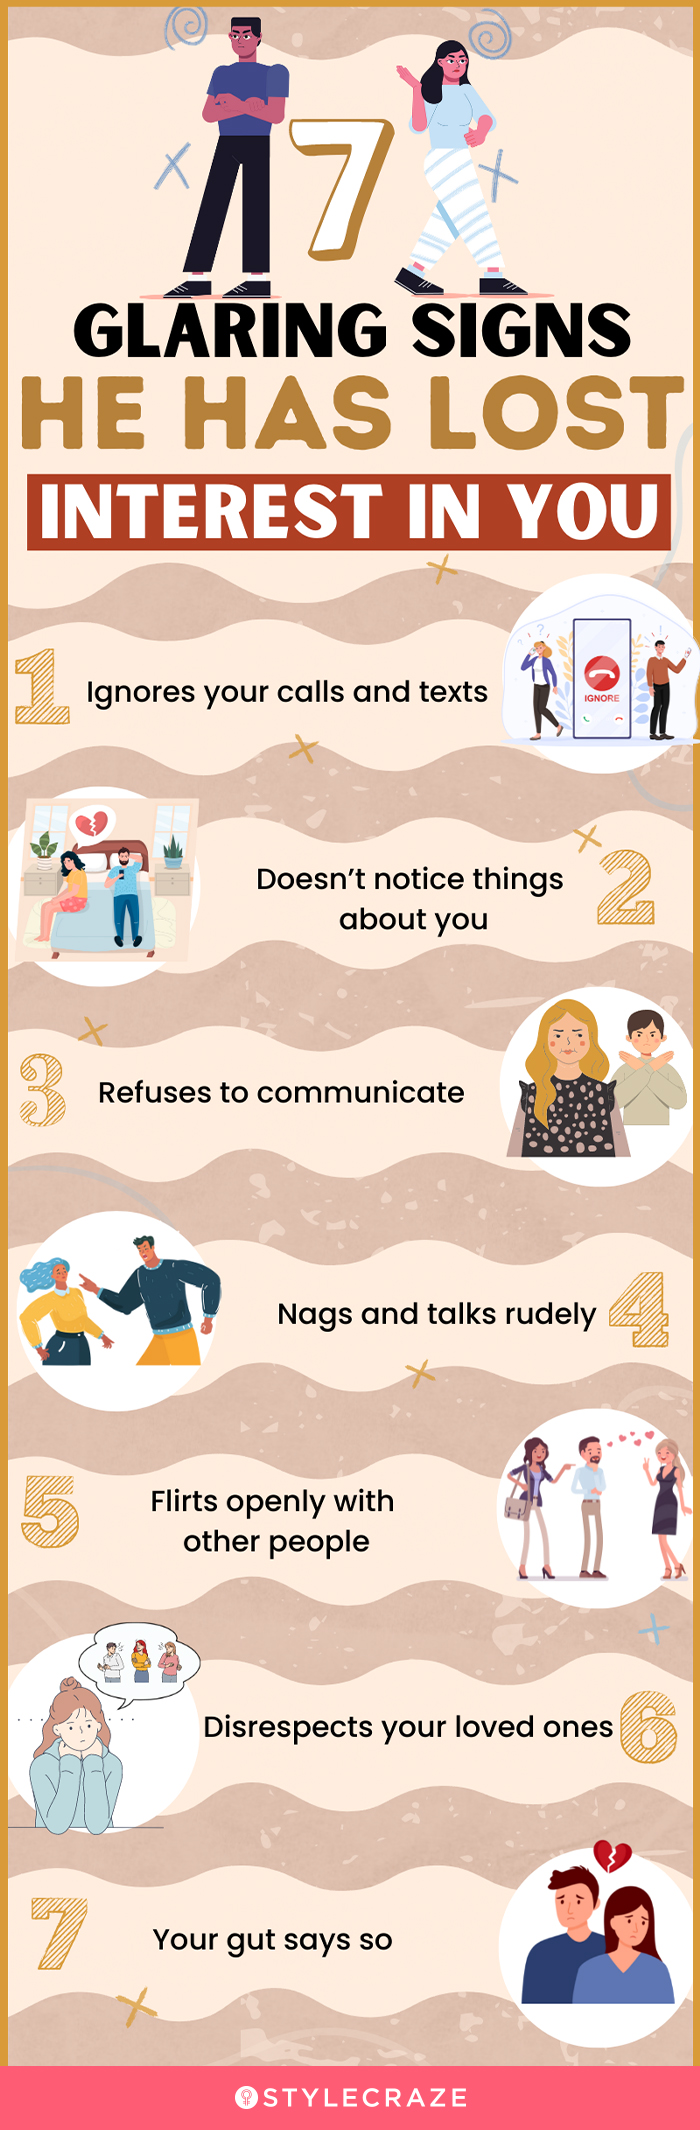 7 glaring signs he has lost interest in you (infographic)